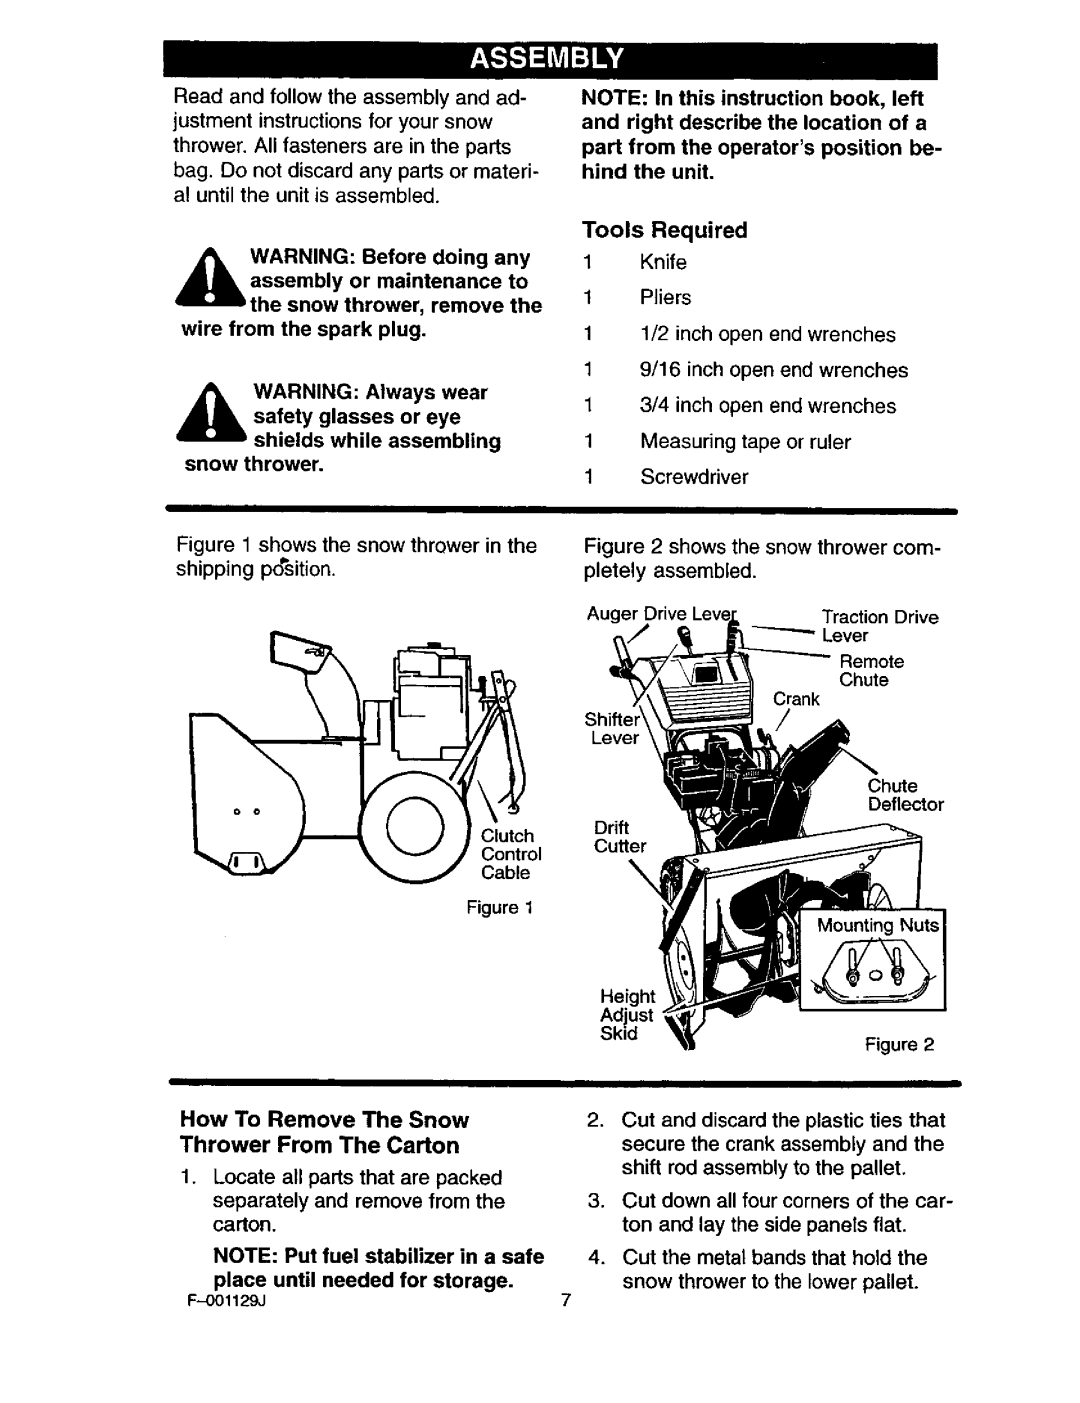 Craftsman 536.88112 operating instructions How To Remove The Snow Thrower From The Carton, Tools Required, Lever, Deflector 